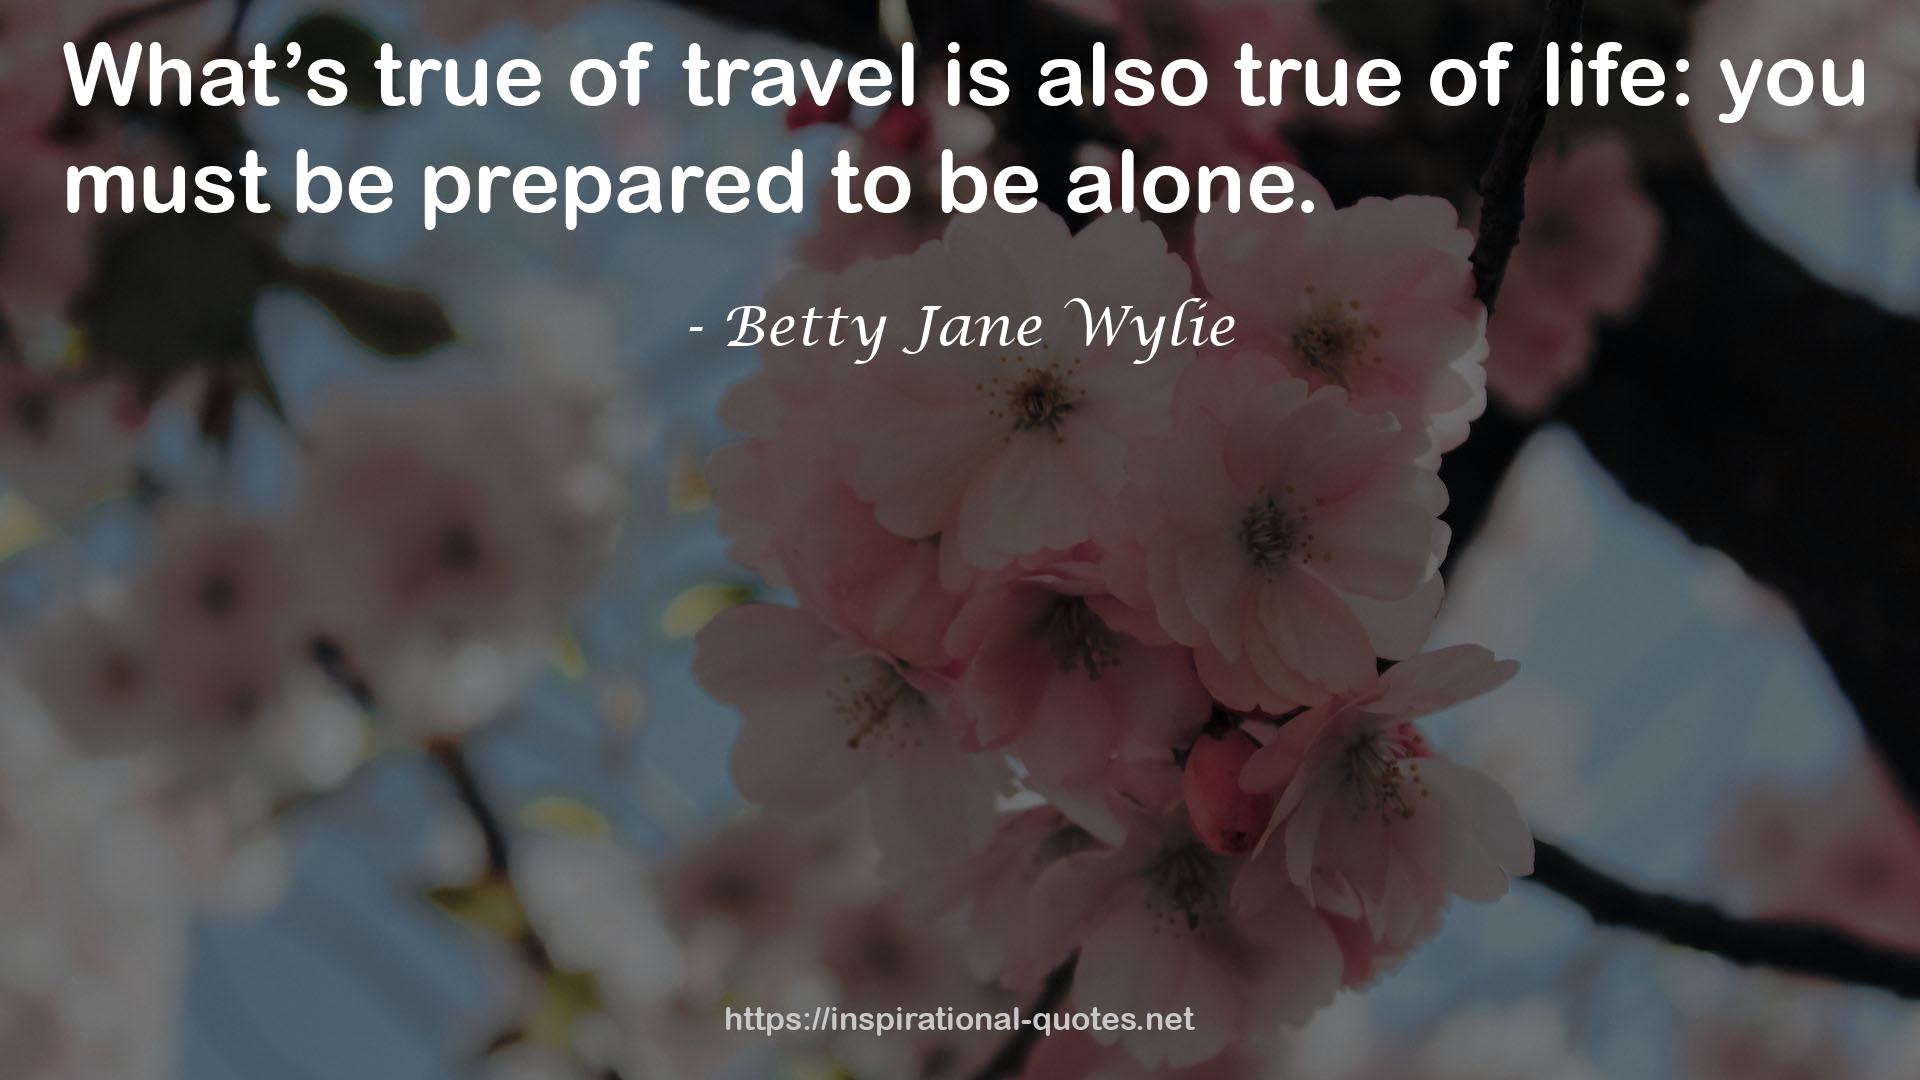 Betty Jane Wylie QUOTES